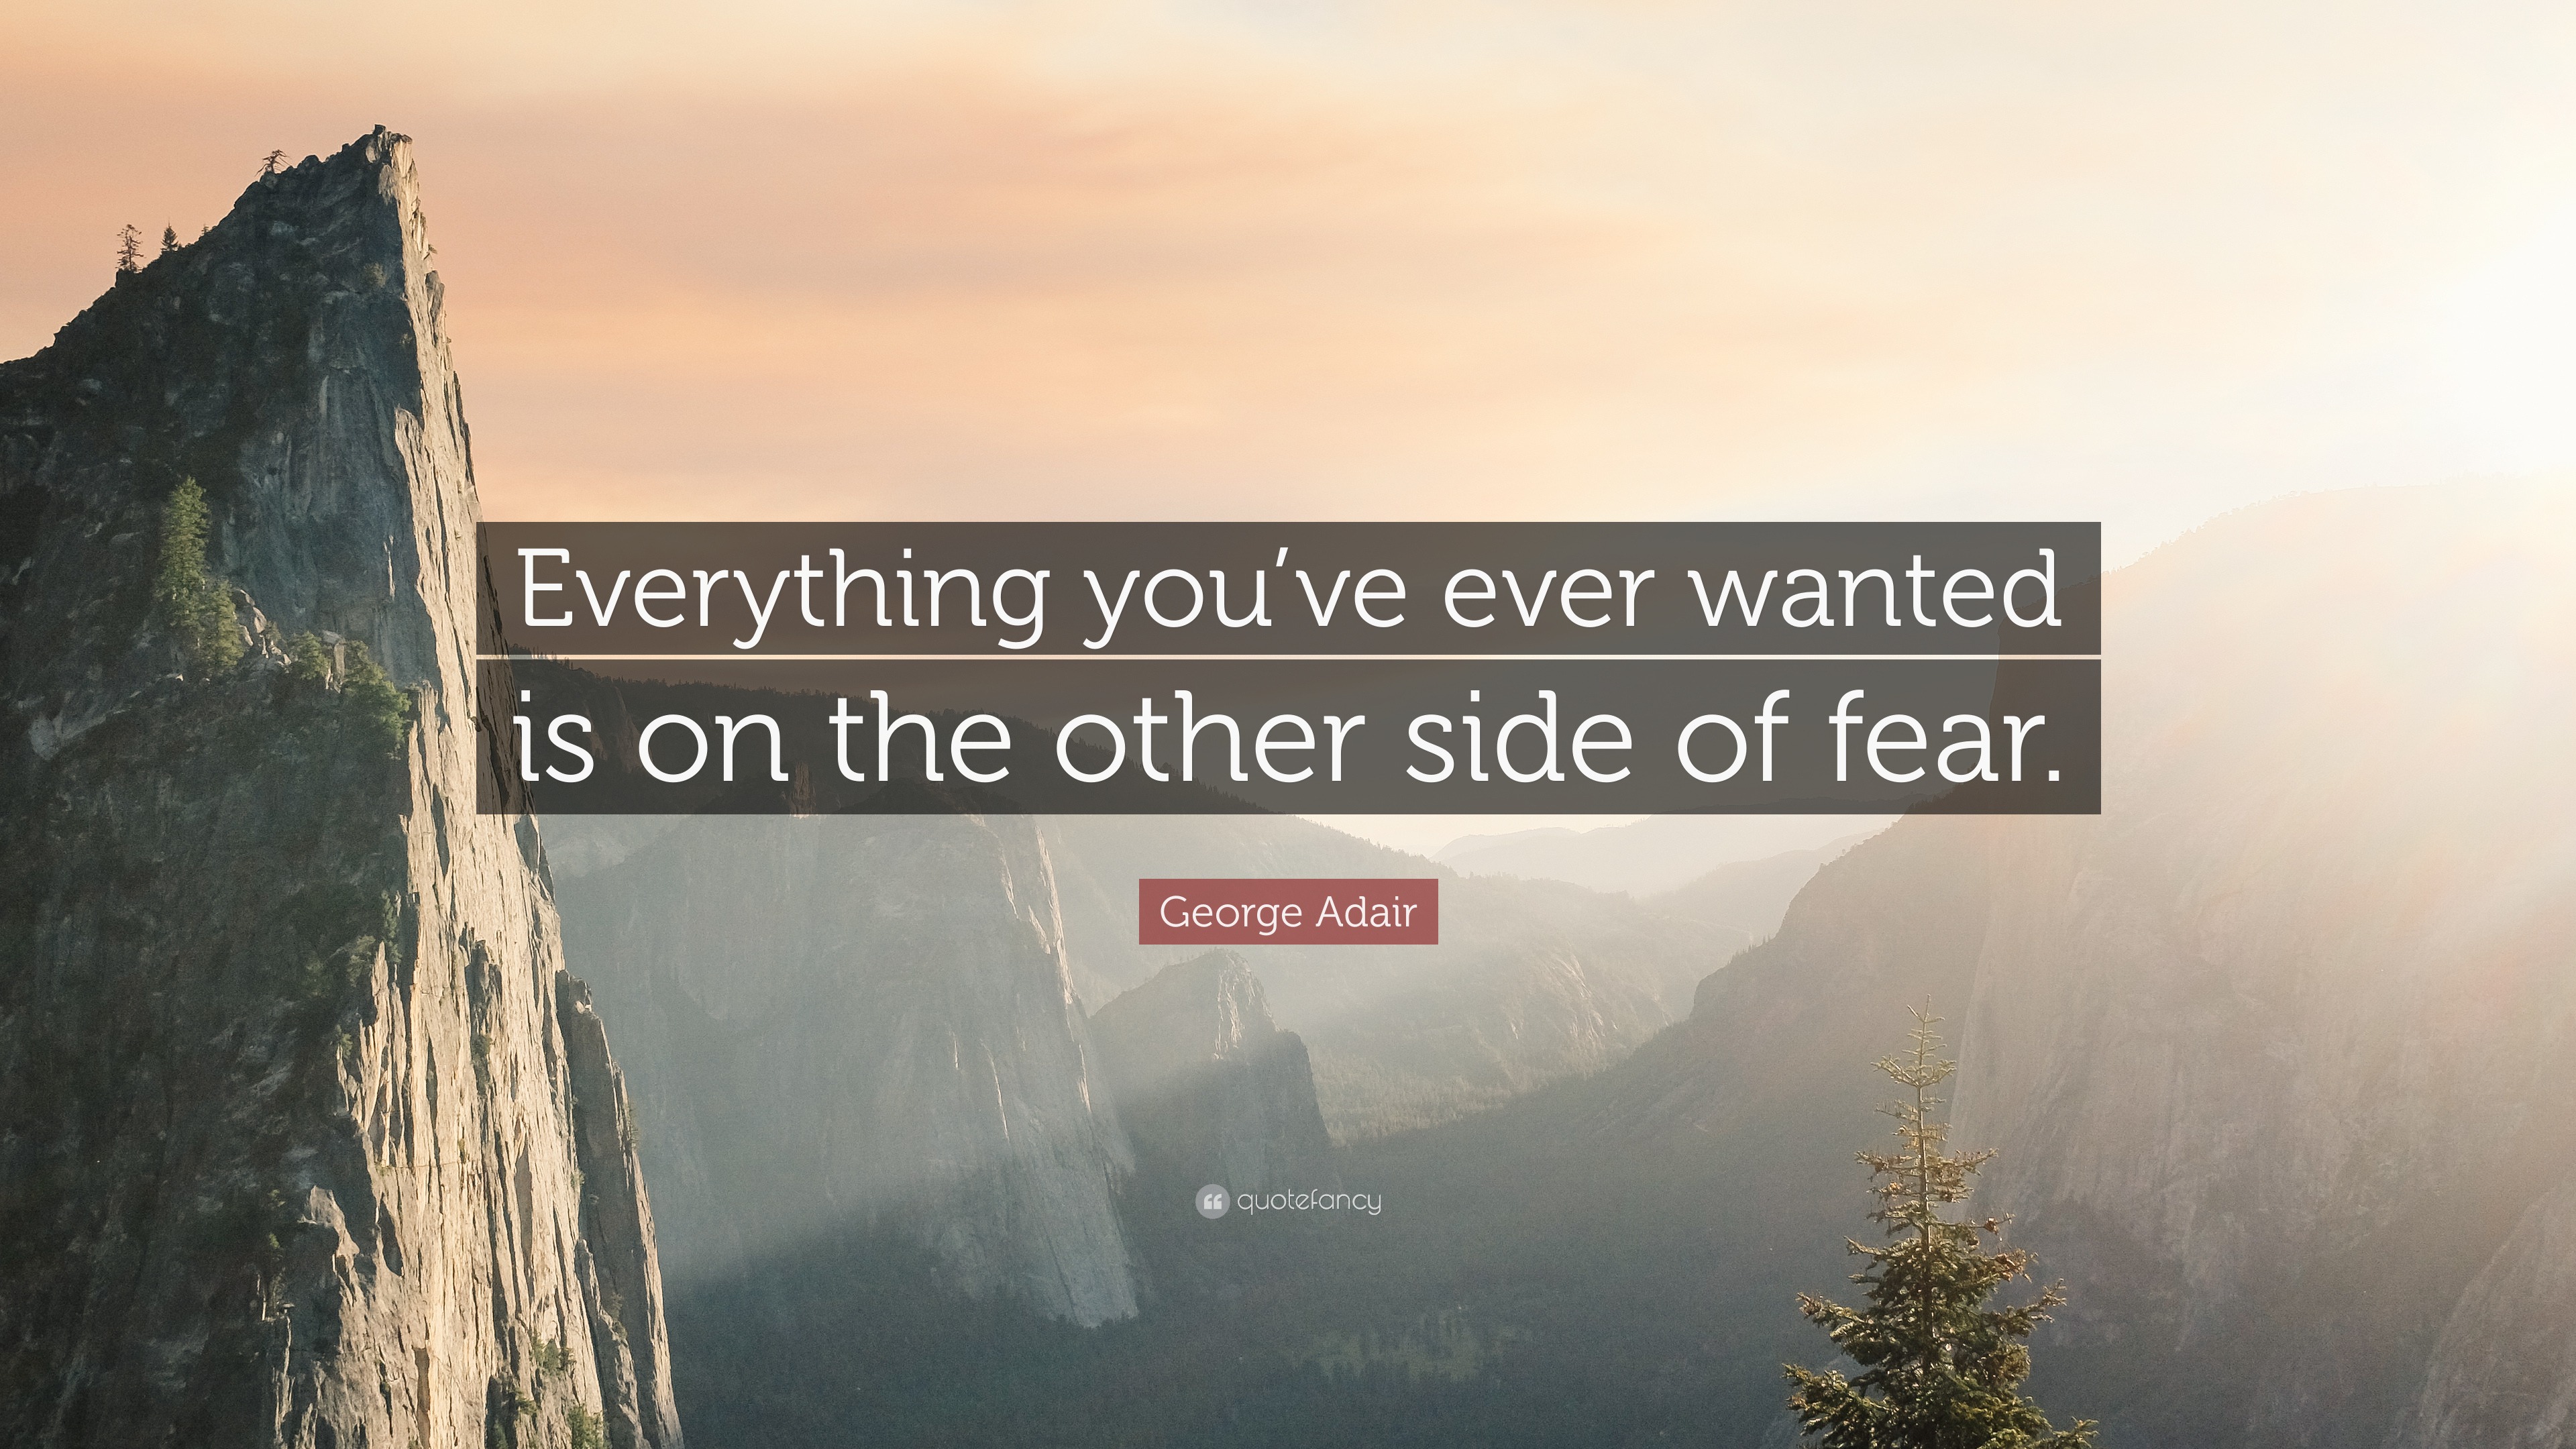 George Adair Quote “everything Youve Ever Wanted Is On The Other Side Of Fear” 